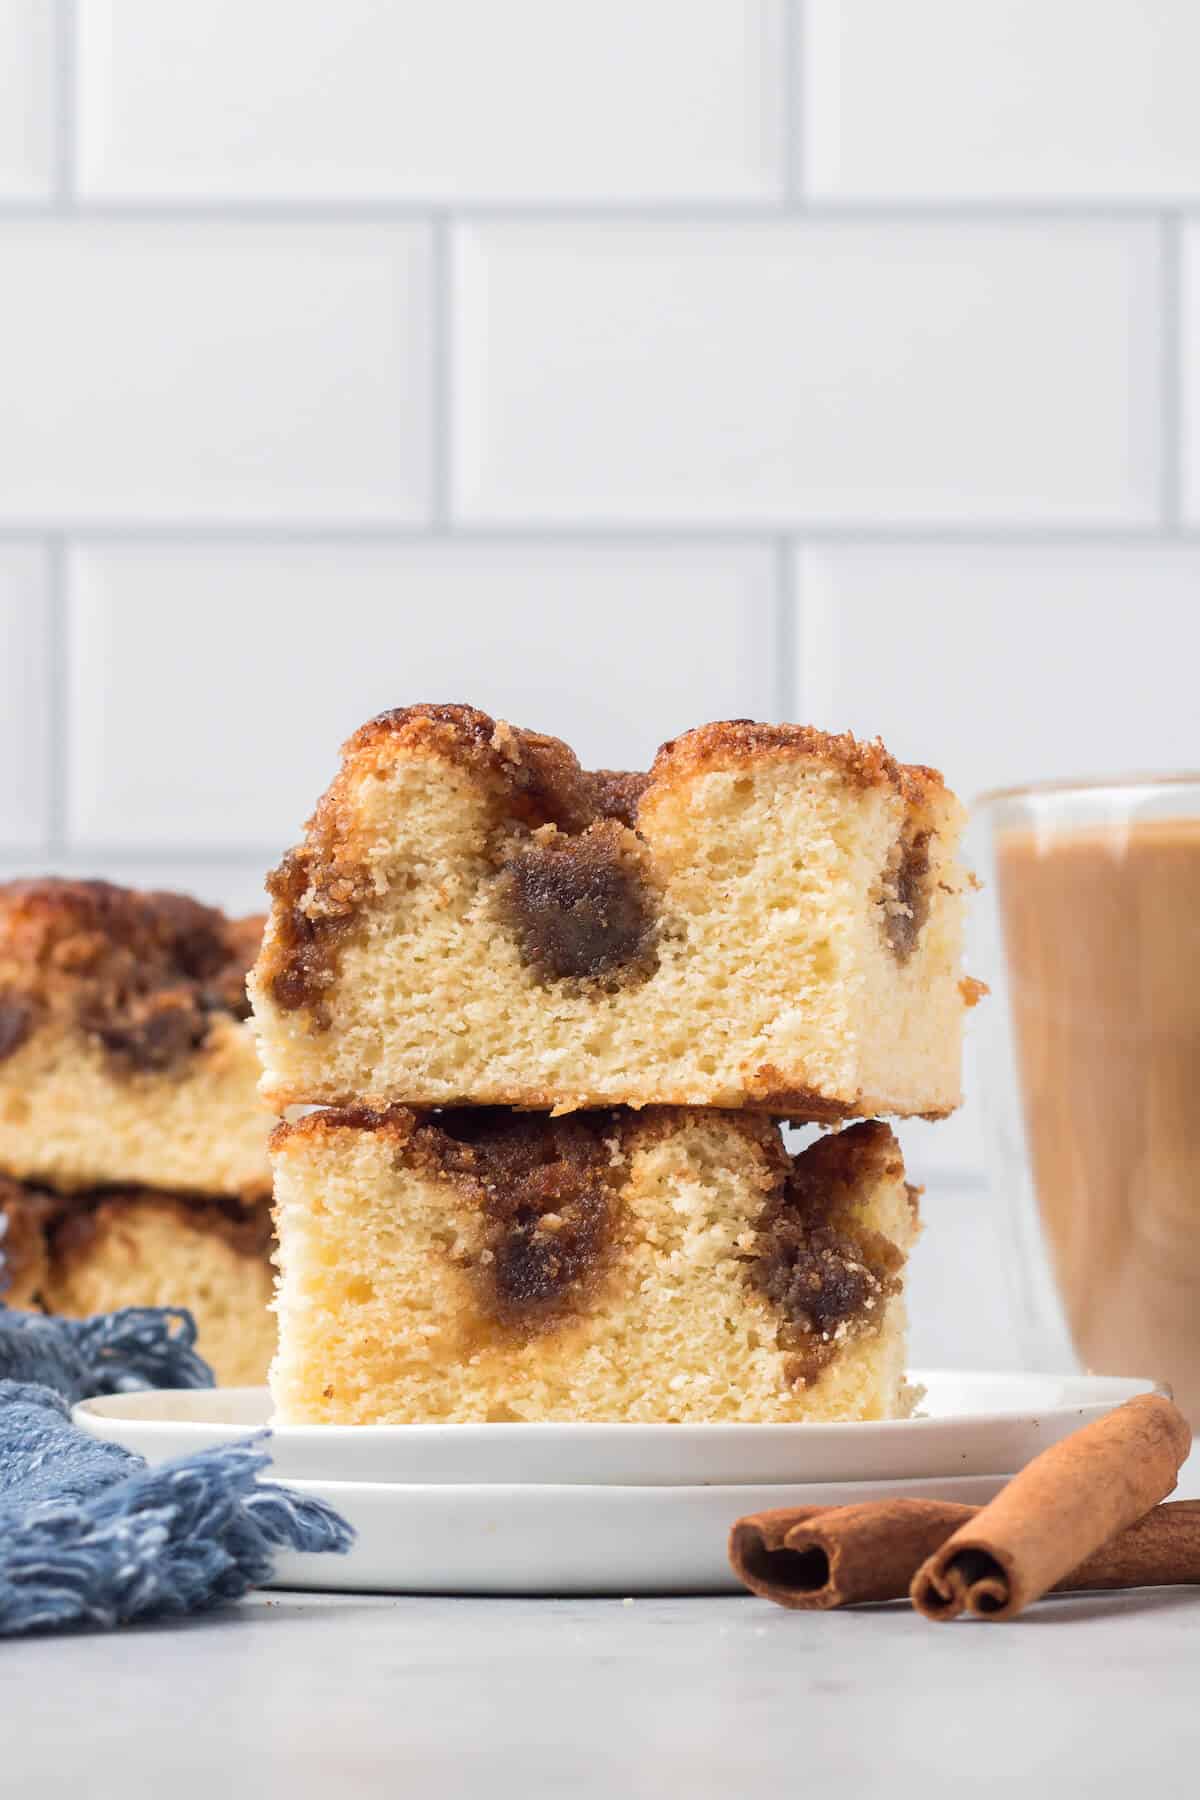 A stack of two pieces of cinnamon coffee cake.